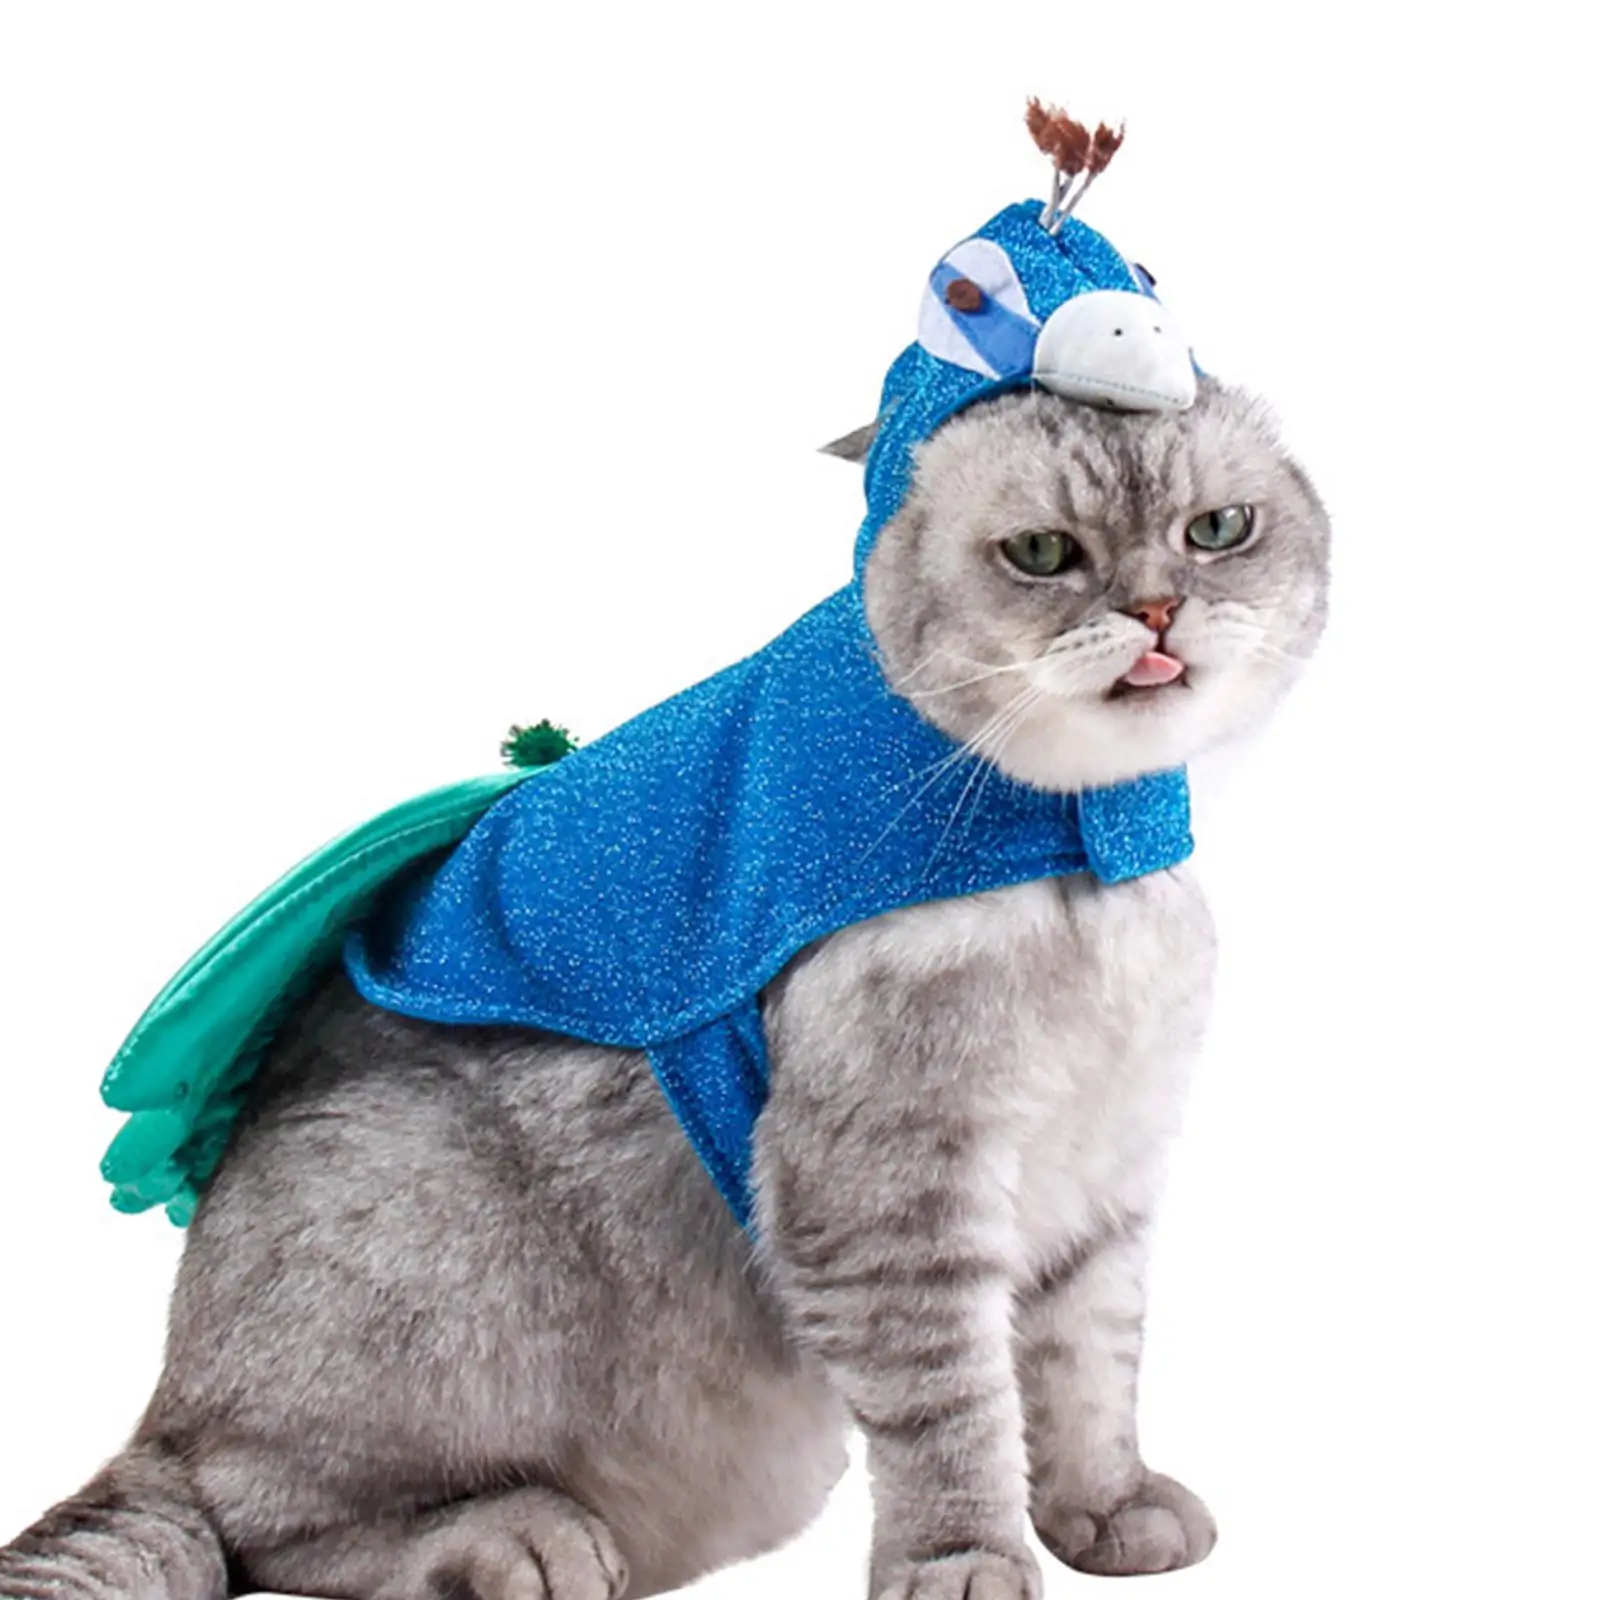 Funny Cat Peacock Costume Hat Apparel Breathable Coat Soft Jacket Outfit Pet Clothes for Kitten Festival Easter Cosplay